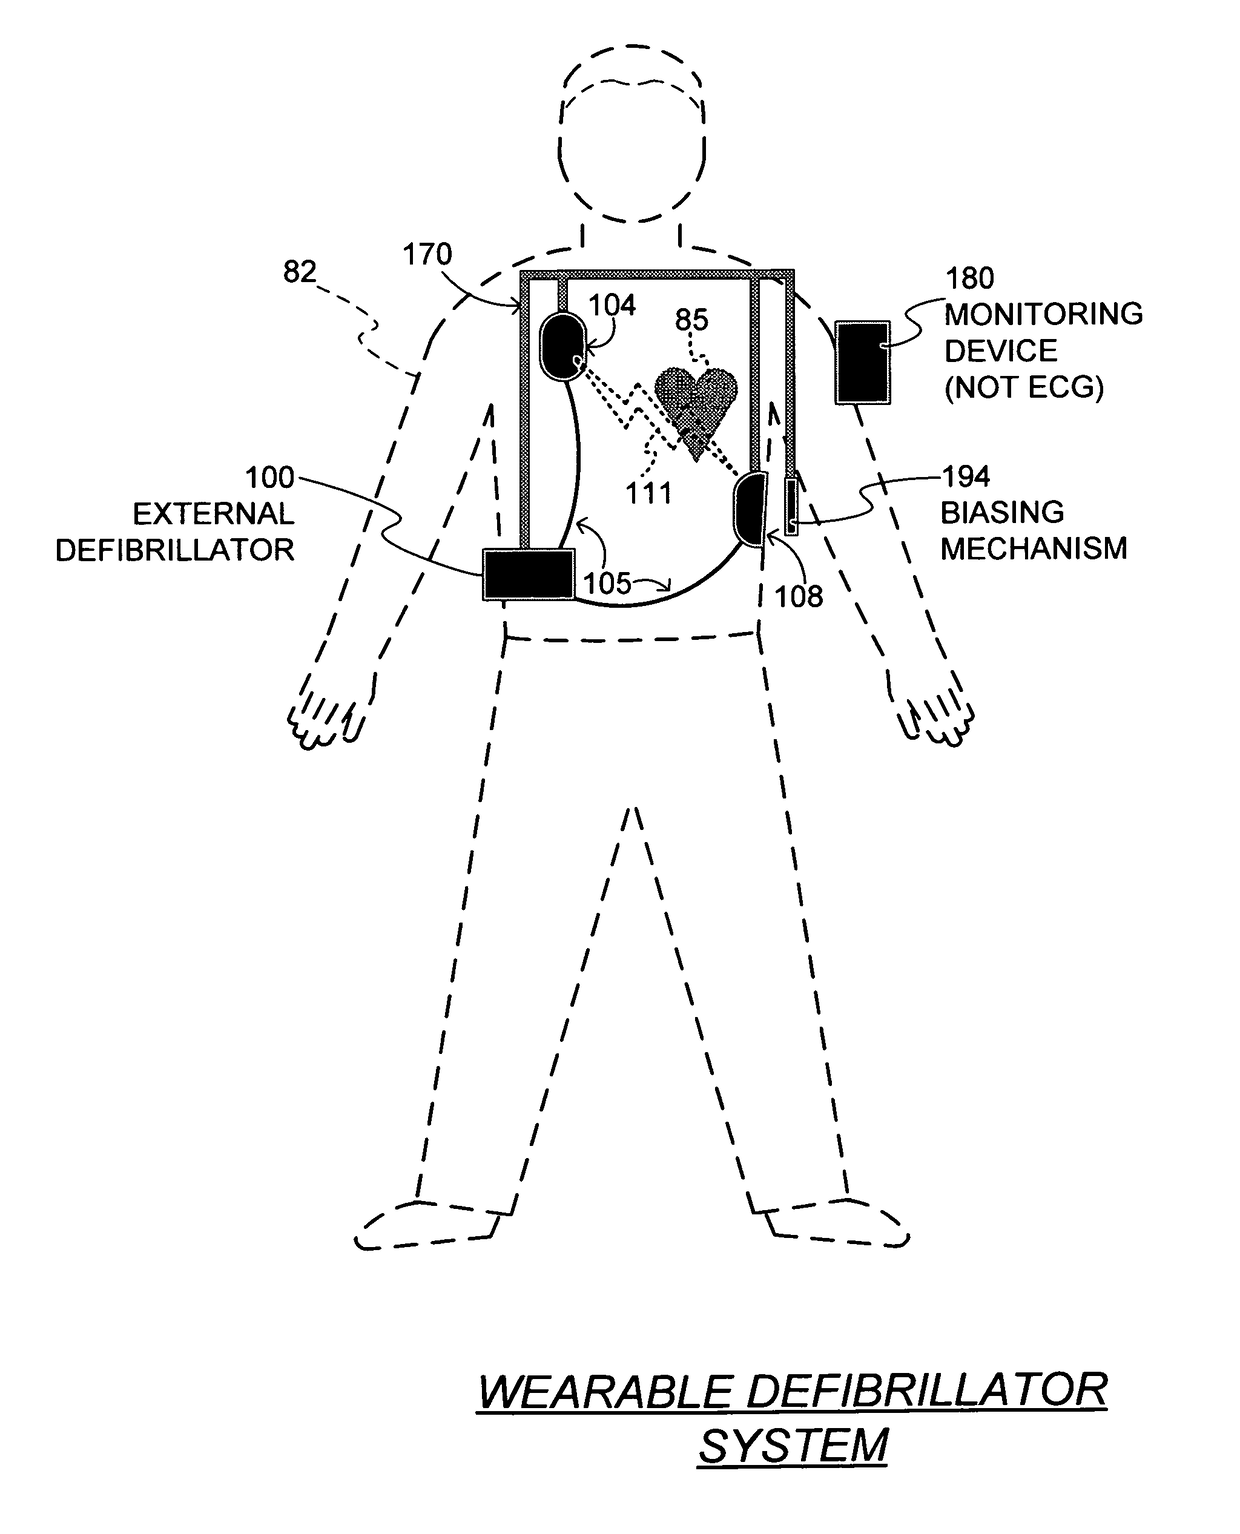 Wearable defibrillator with no long-term ECG monitoring